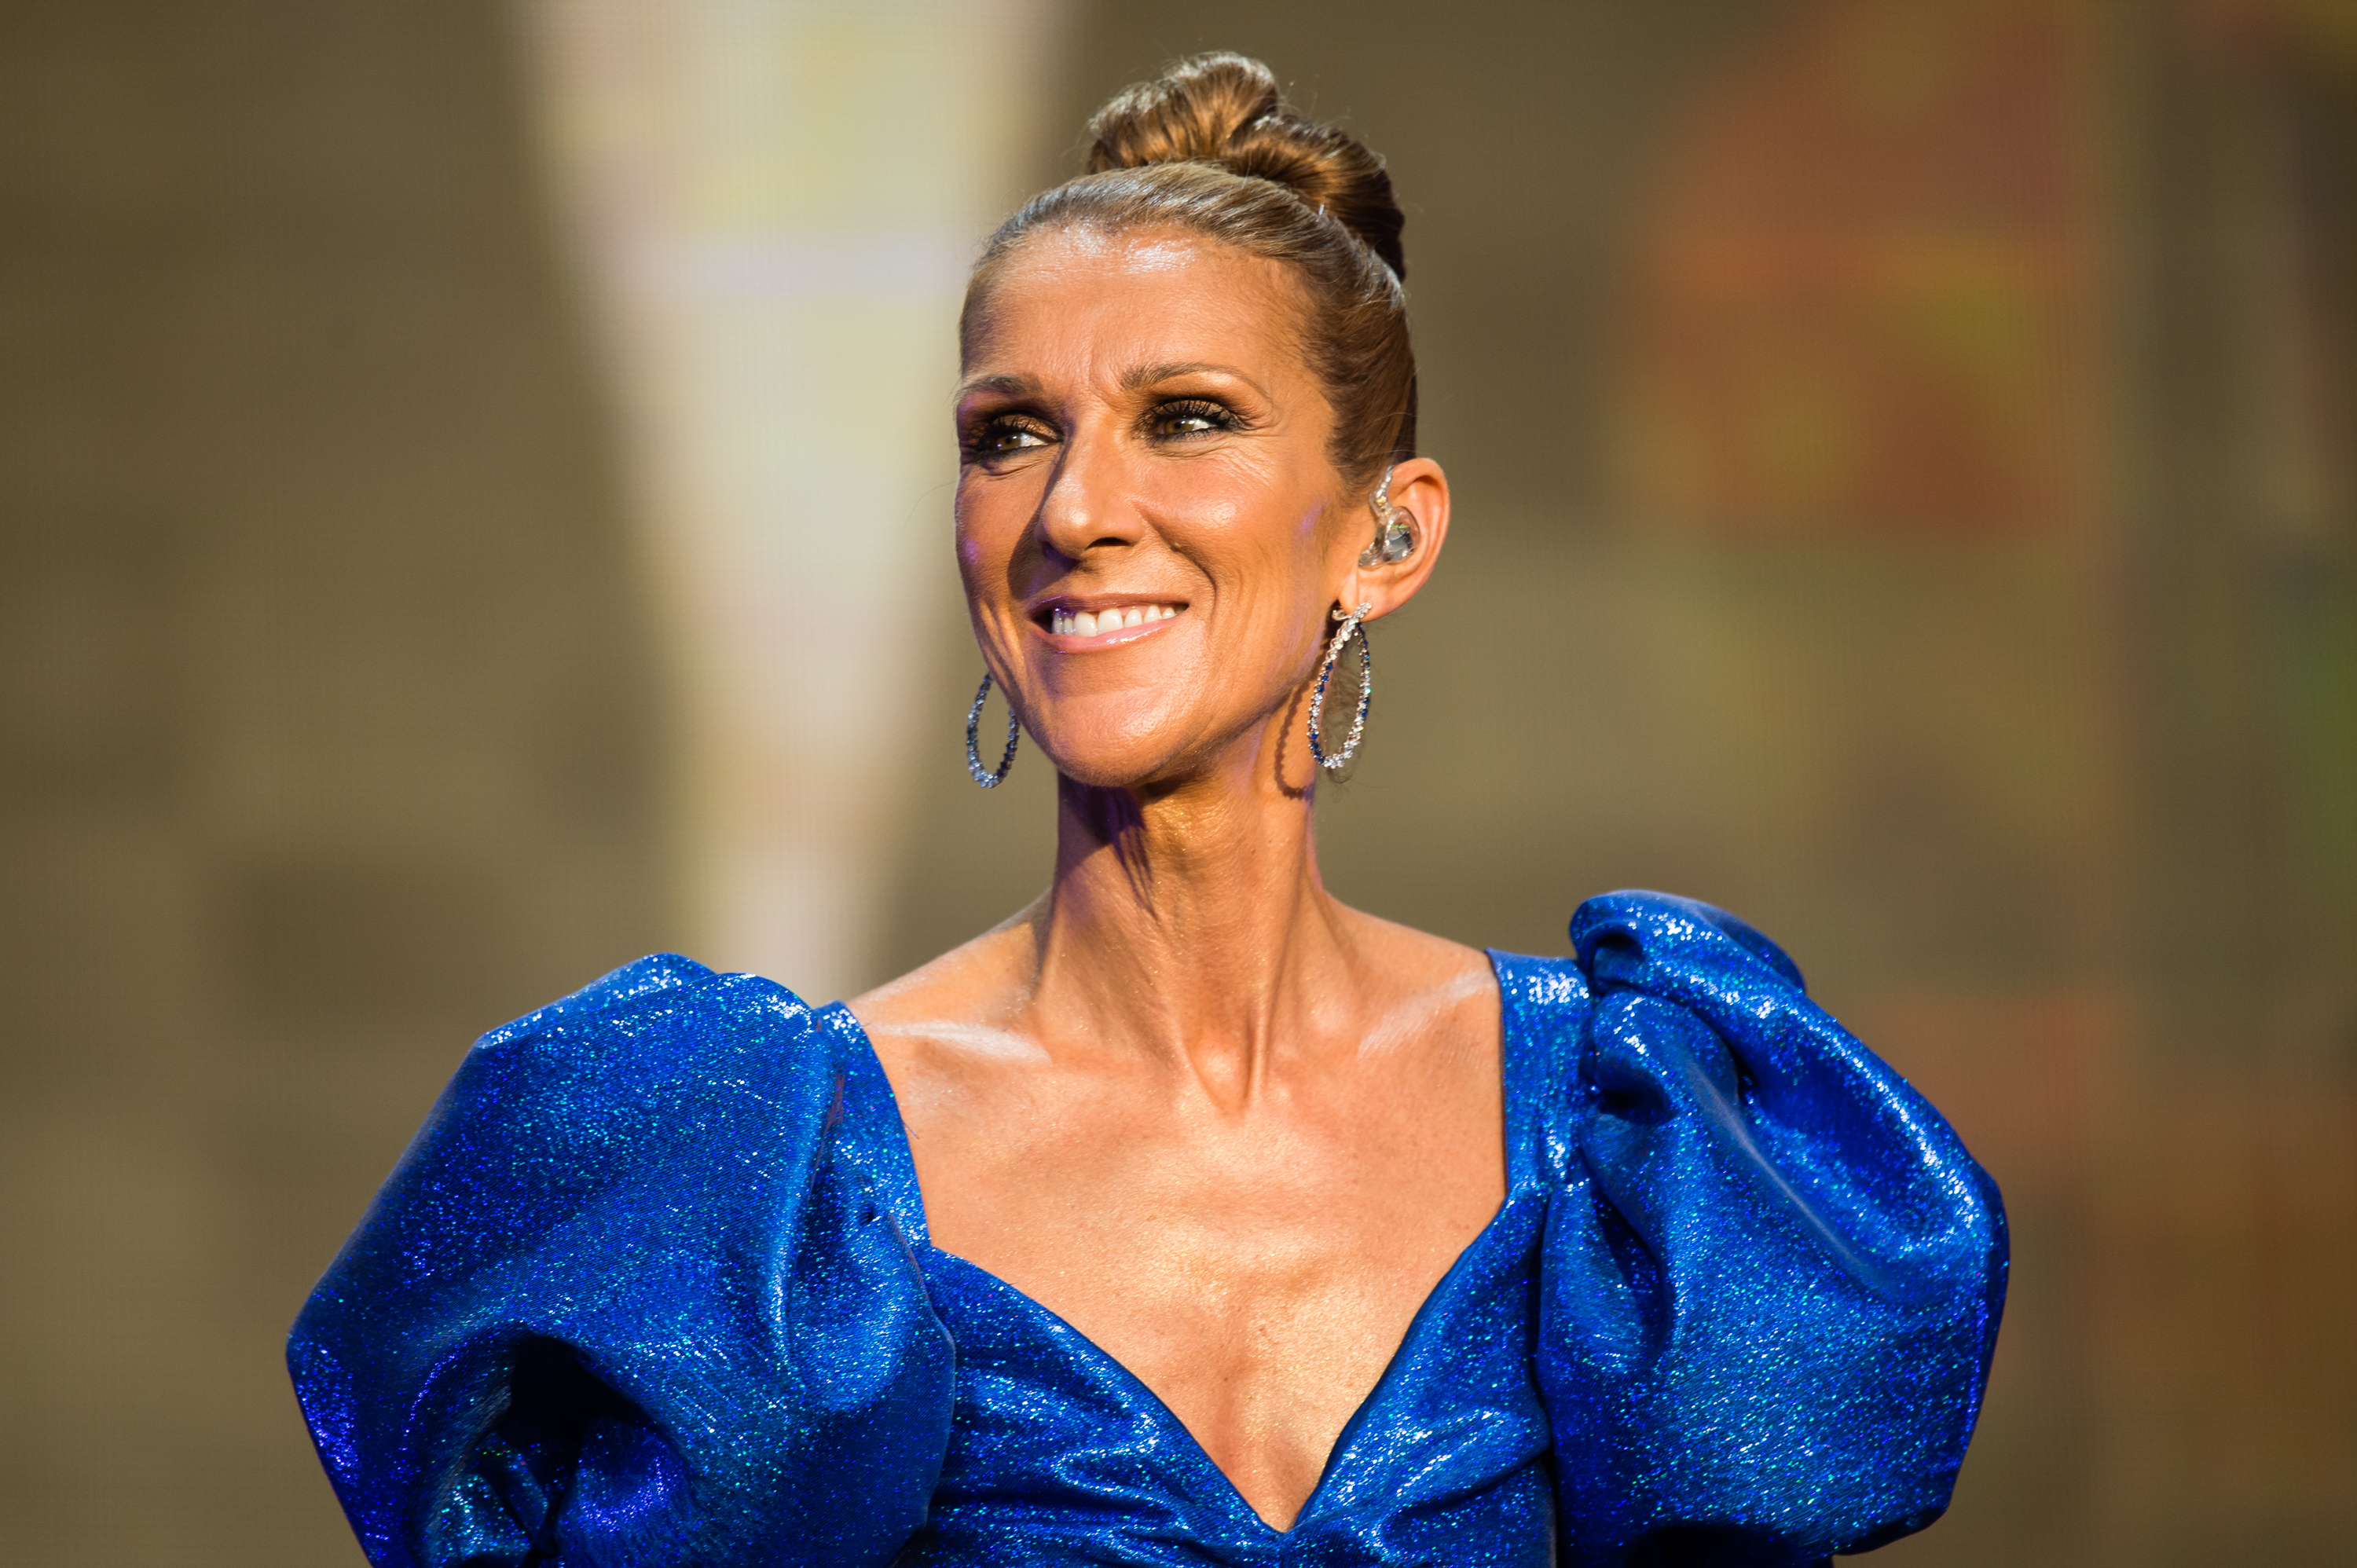 Celine Dion performs live at Barclaycard Presents British Summer Time Hyde Park in London, England on July 05, 2019. | Source: Getty Images